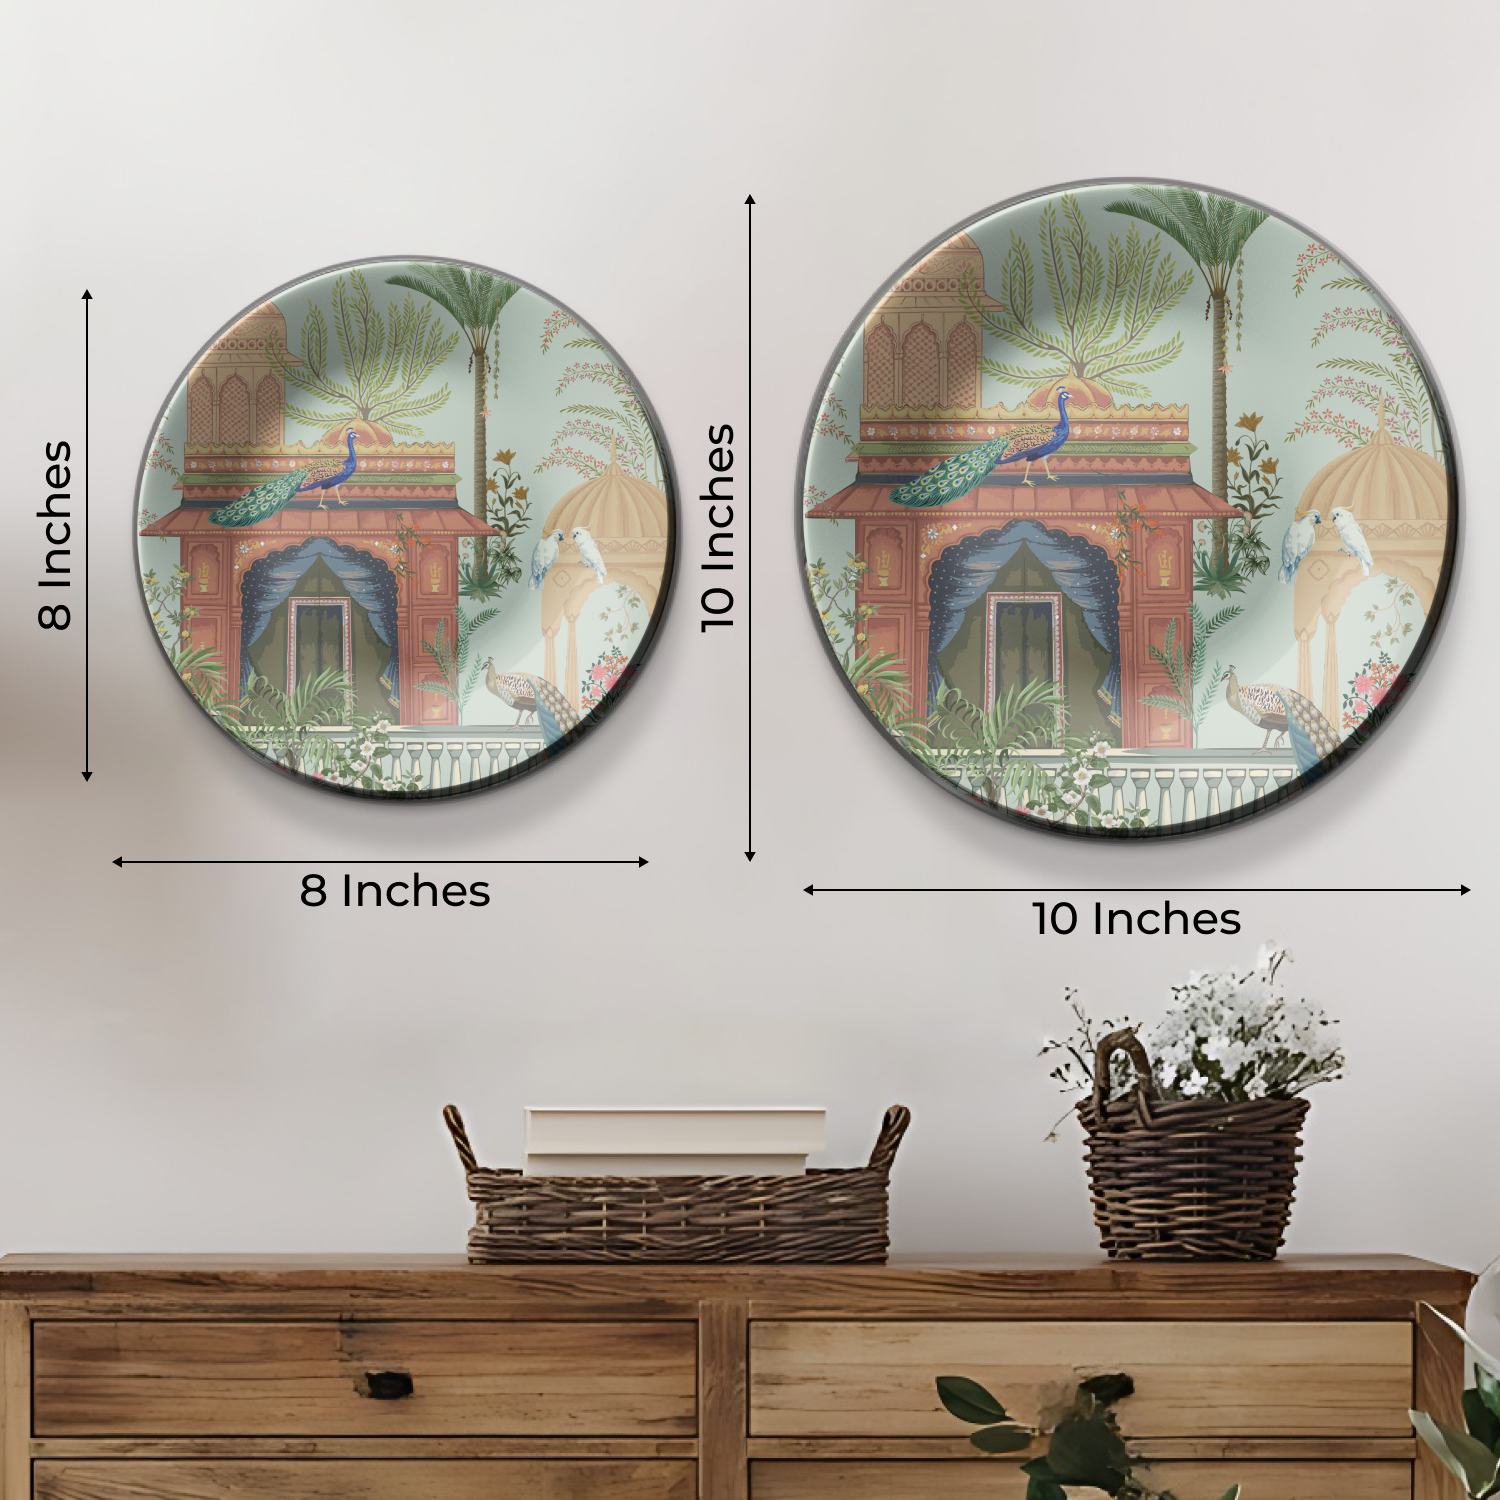 Statement piece for home decoration with natural elegance and royal flair ceramic wall plates